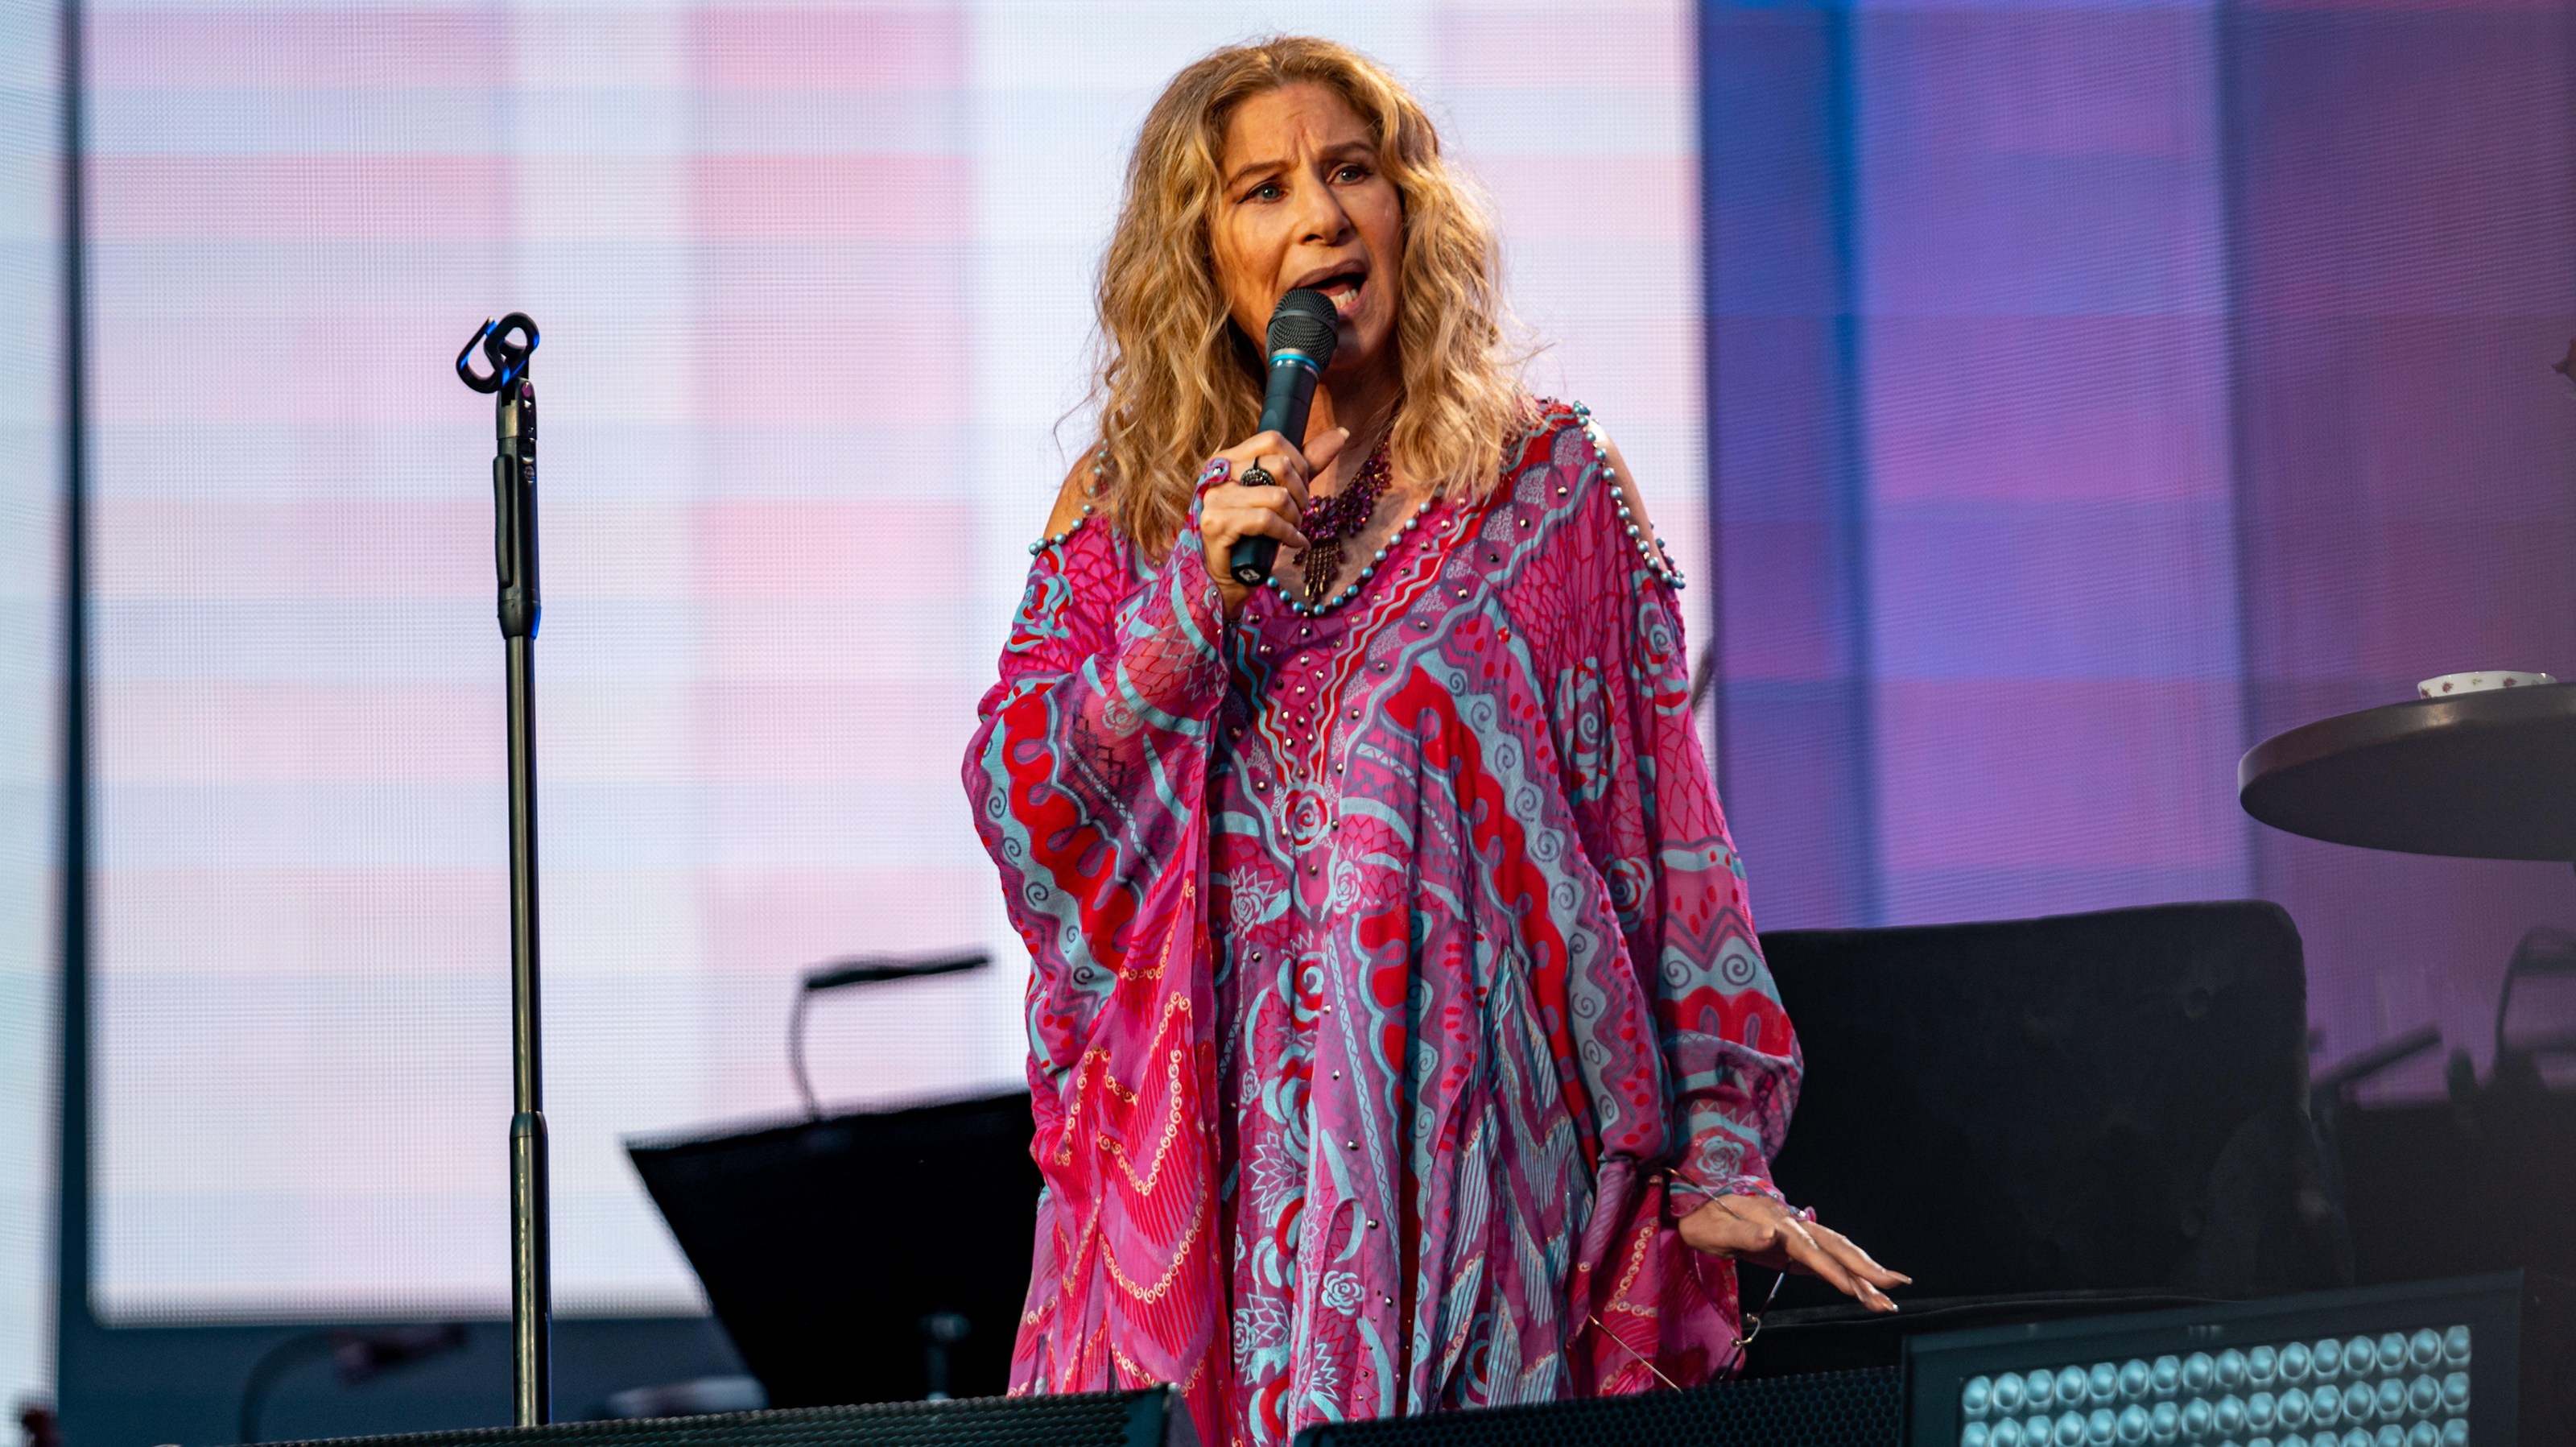 Barbra Streisand performing A Happening At Hyde Park in London July 2019